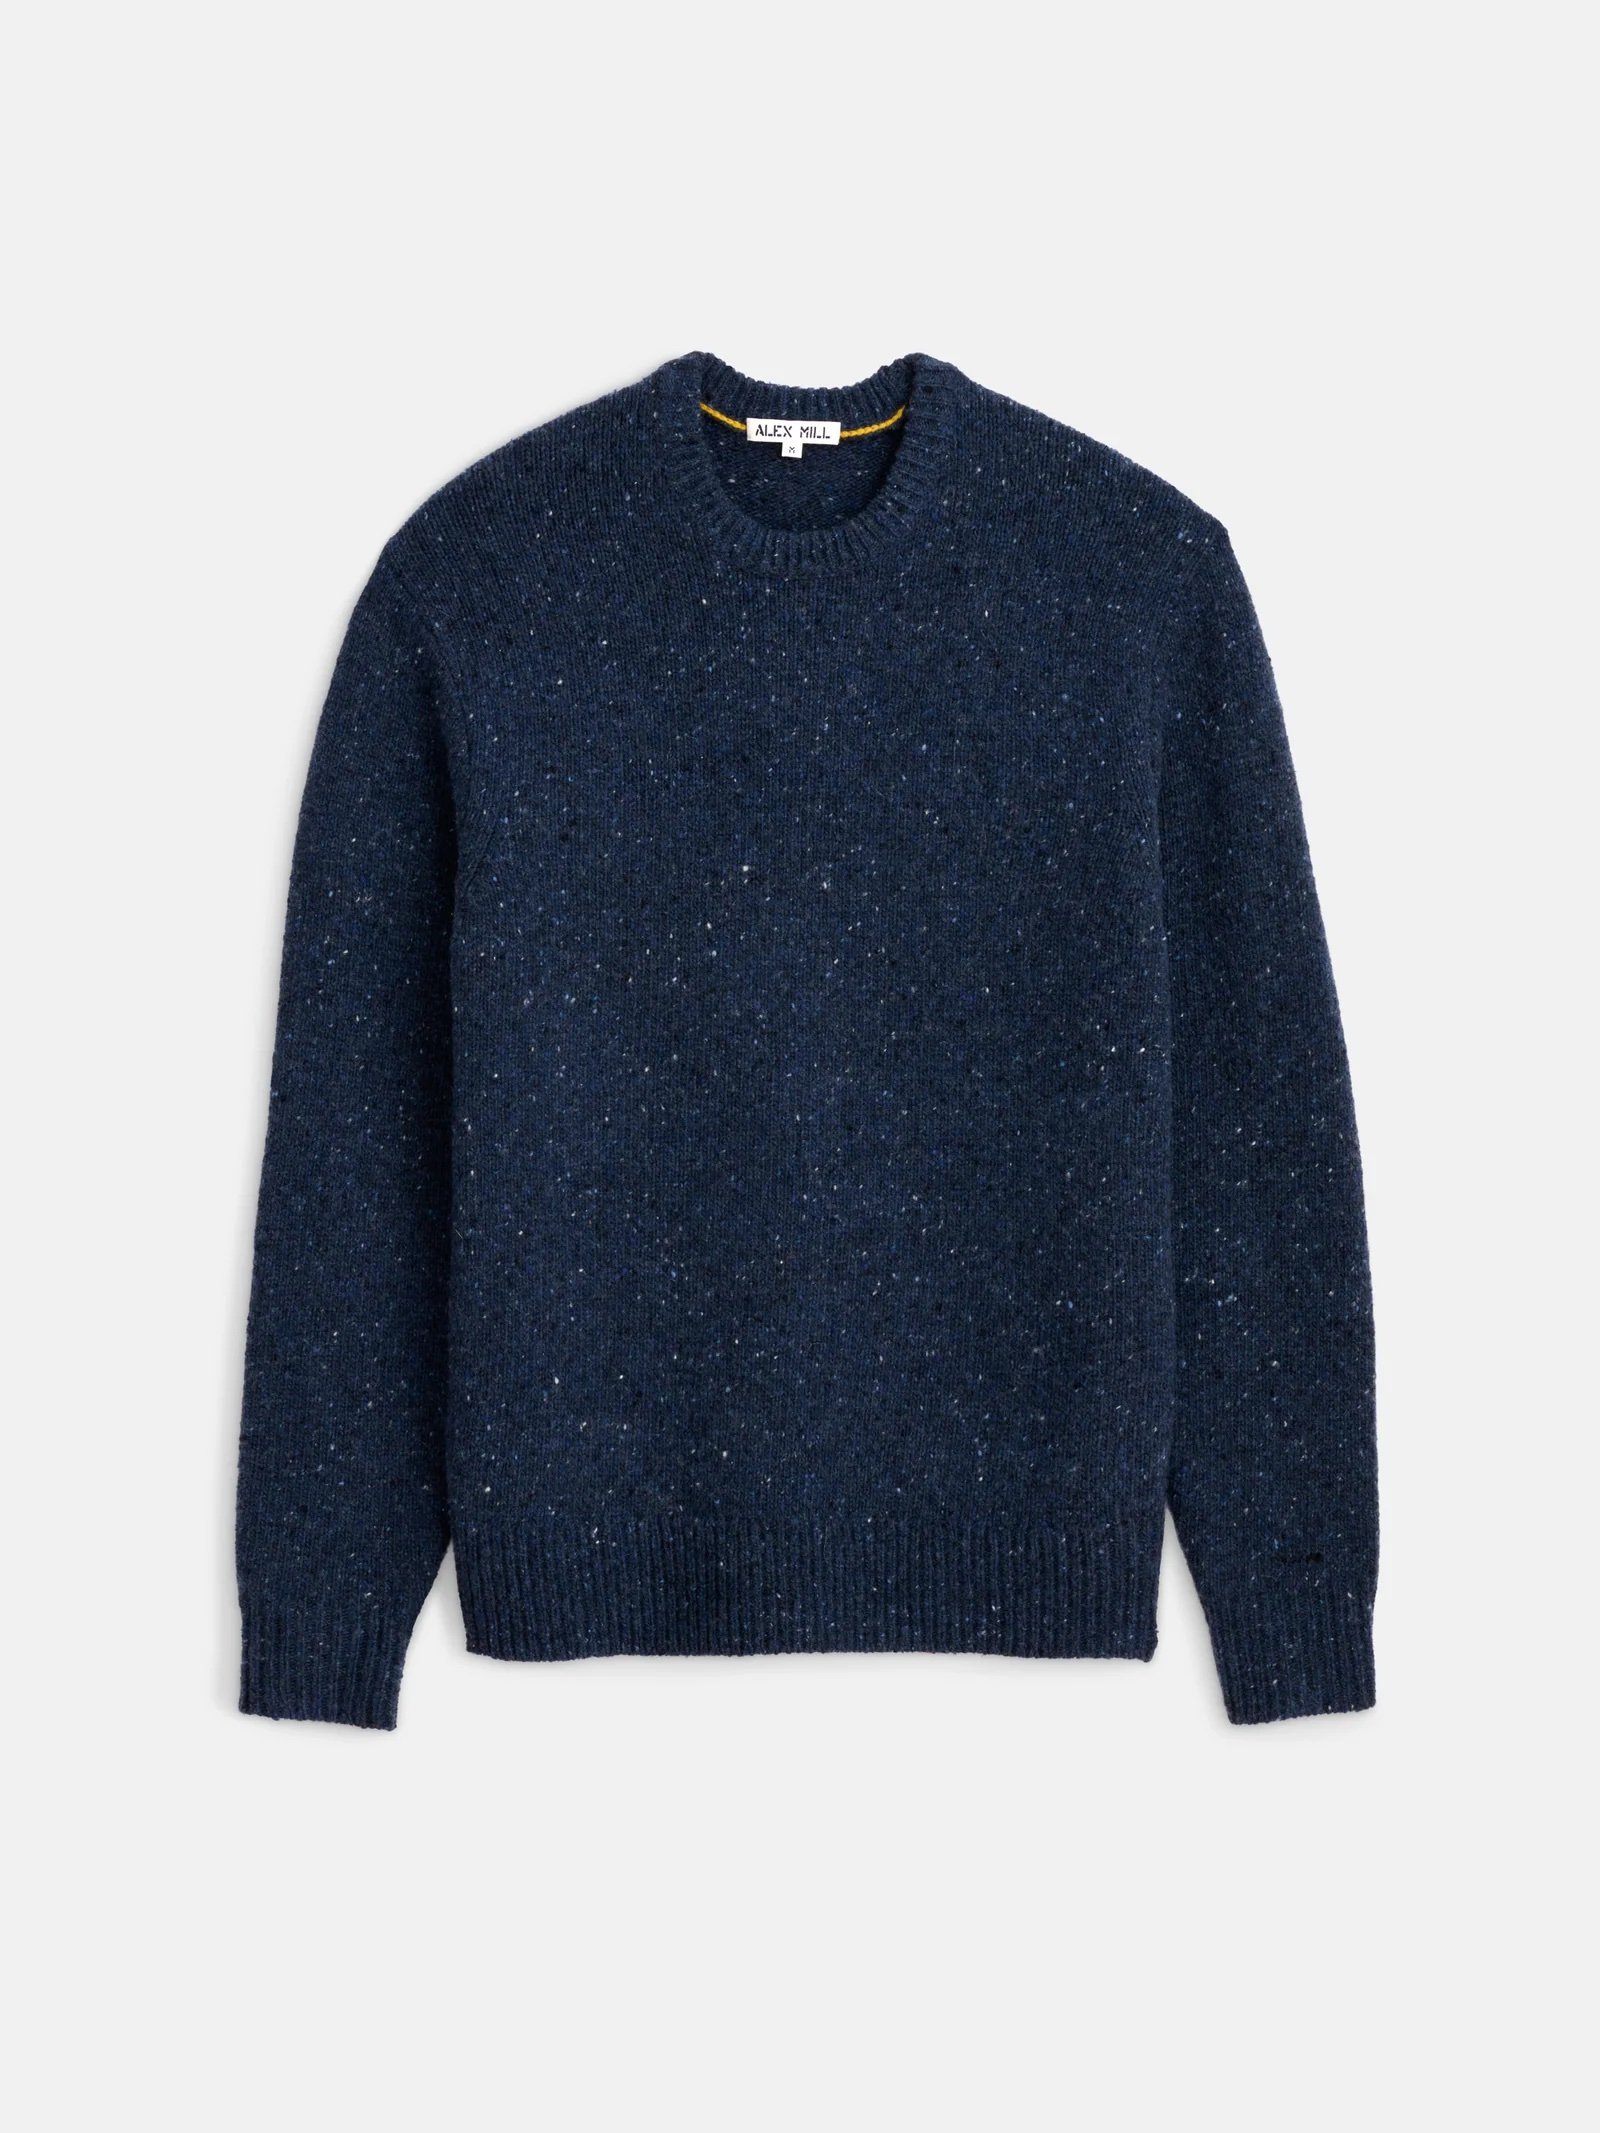 Alex Mill Downing Crewneck in Donegal Wool